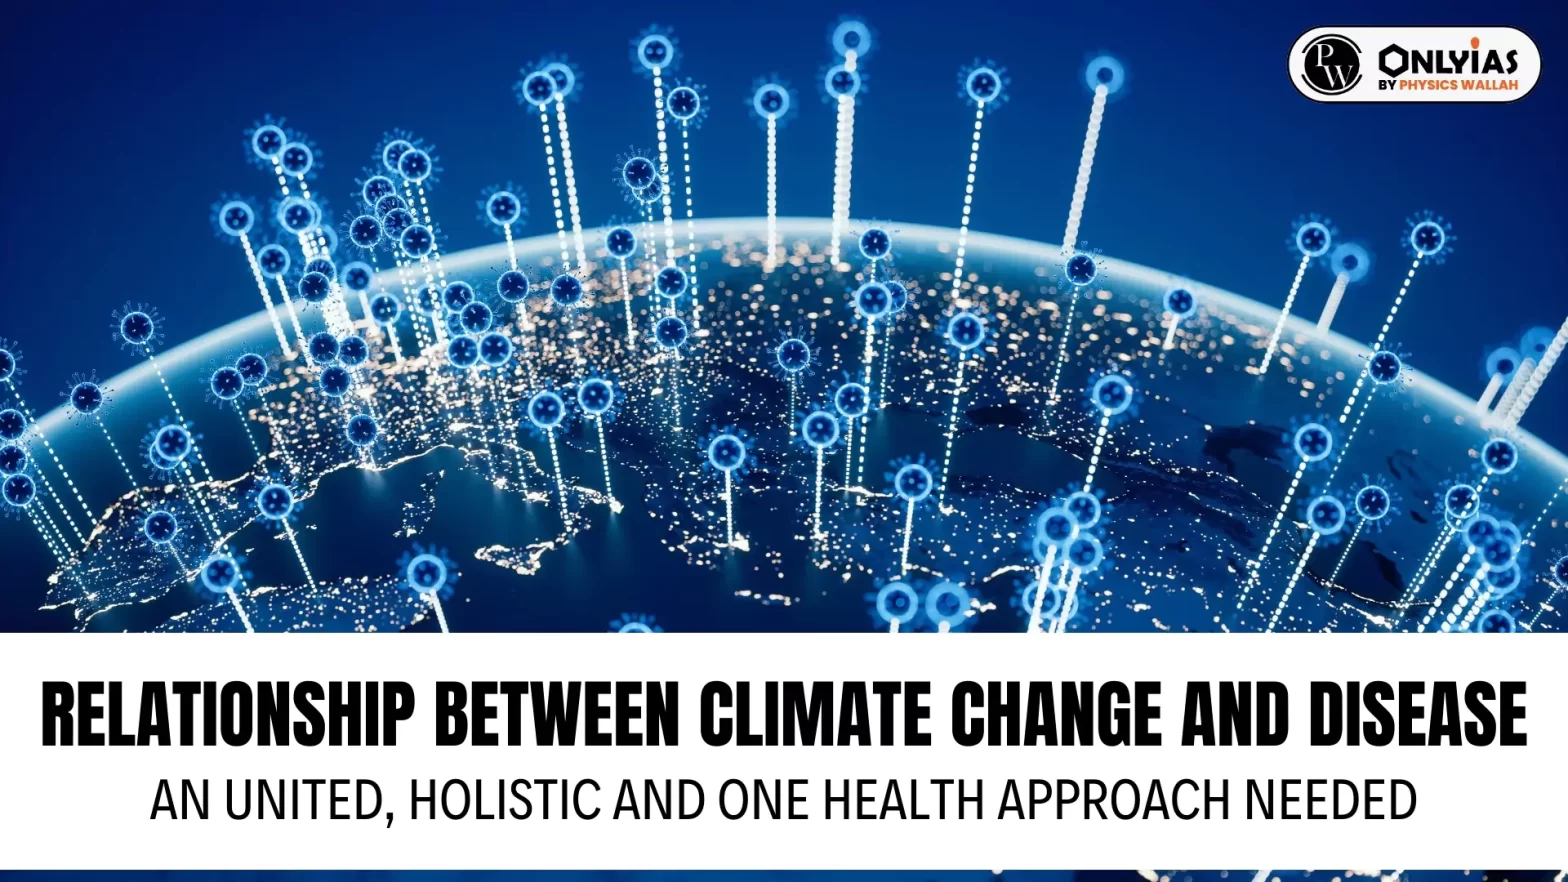 Relationship Between Climate Change and Disease: An United, Holistic and One Health Approach Needed